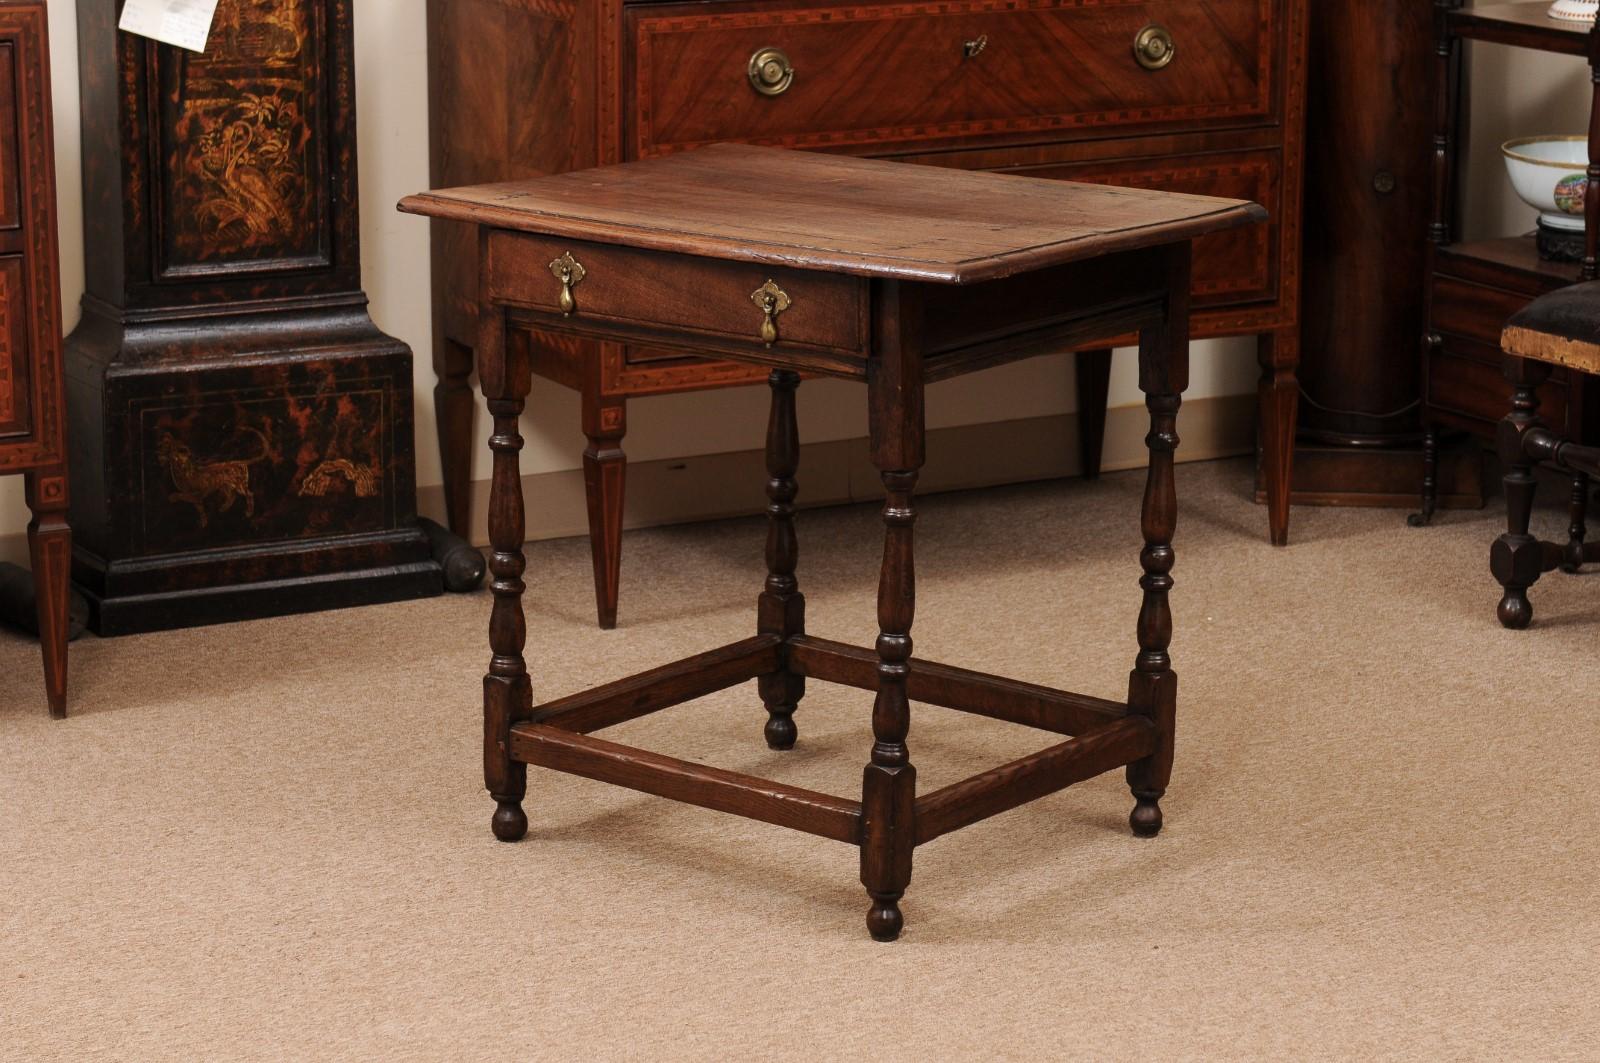 English 18th century Side Table with 1 Drawer, Turned Legs & Box Stretcher 9